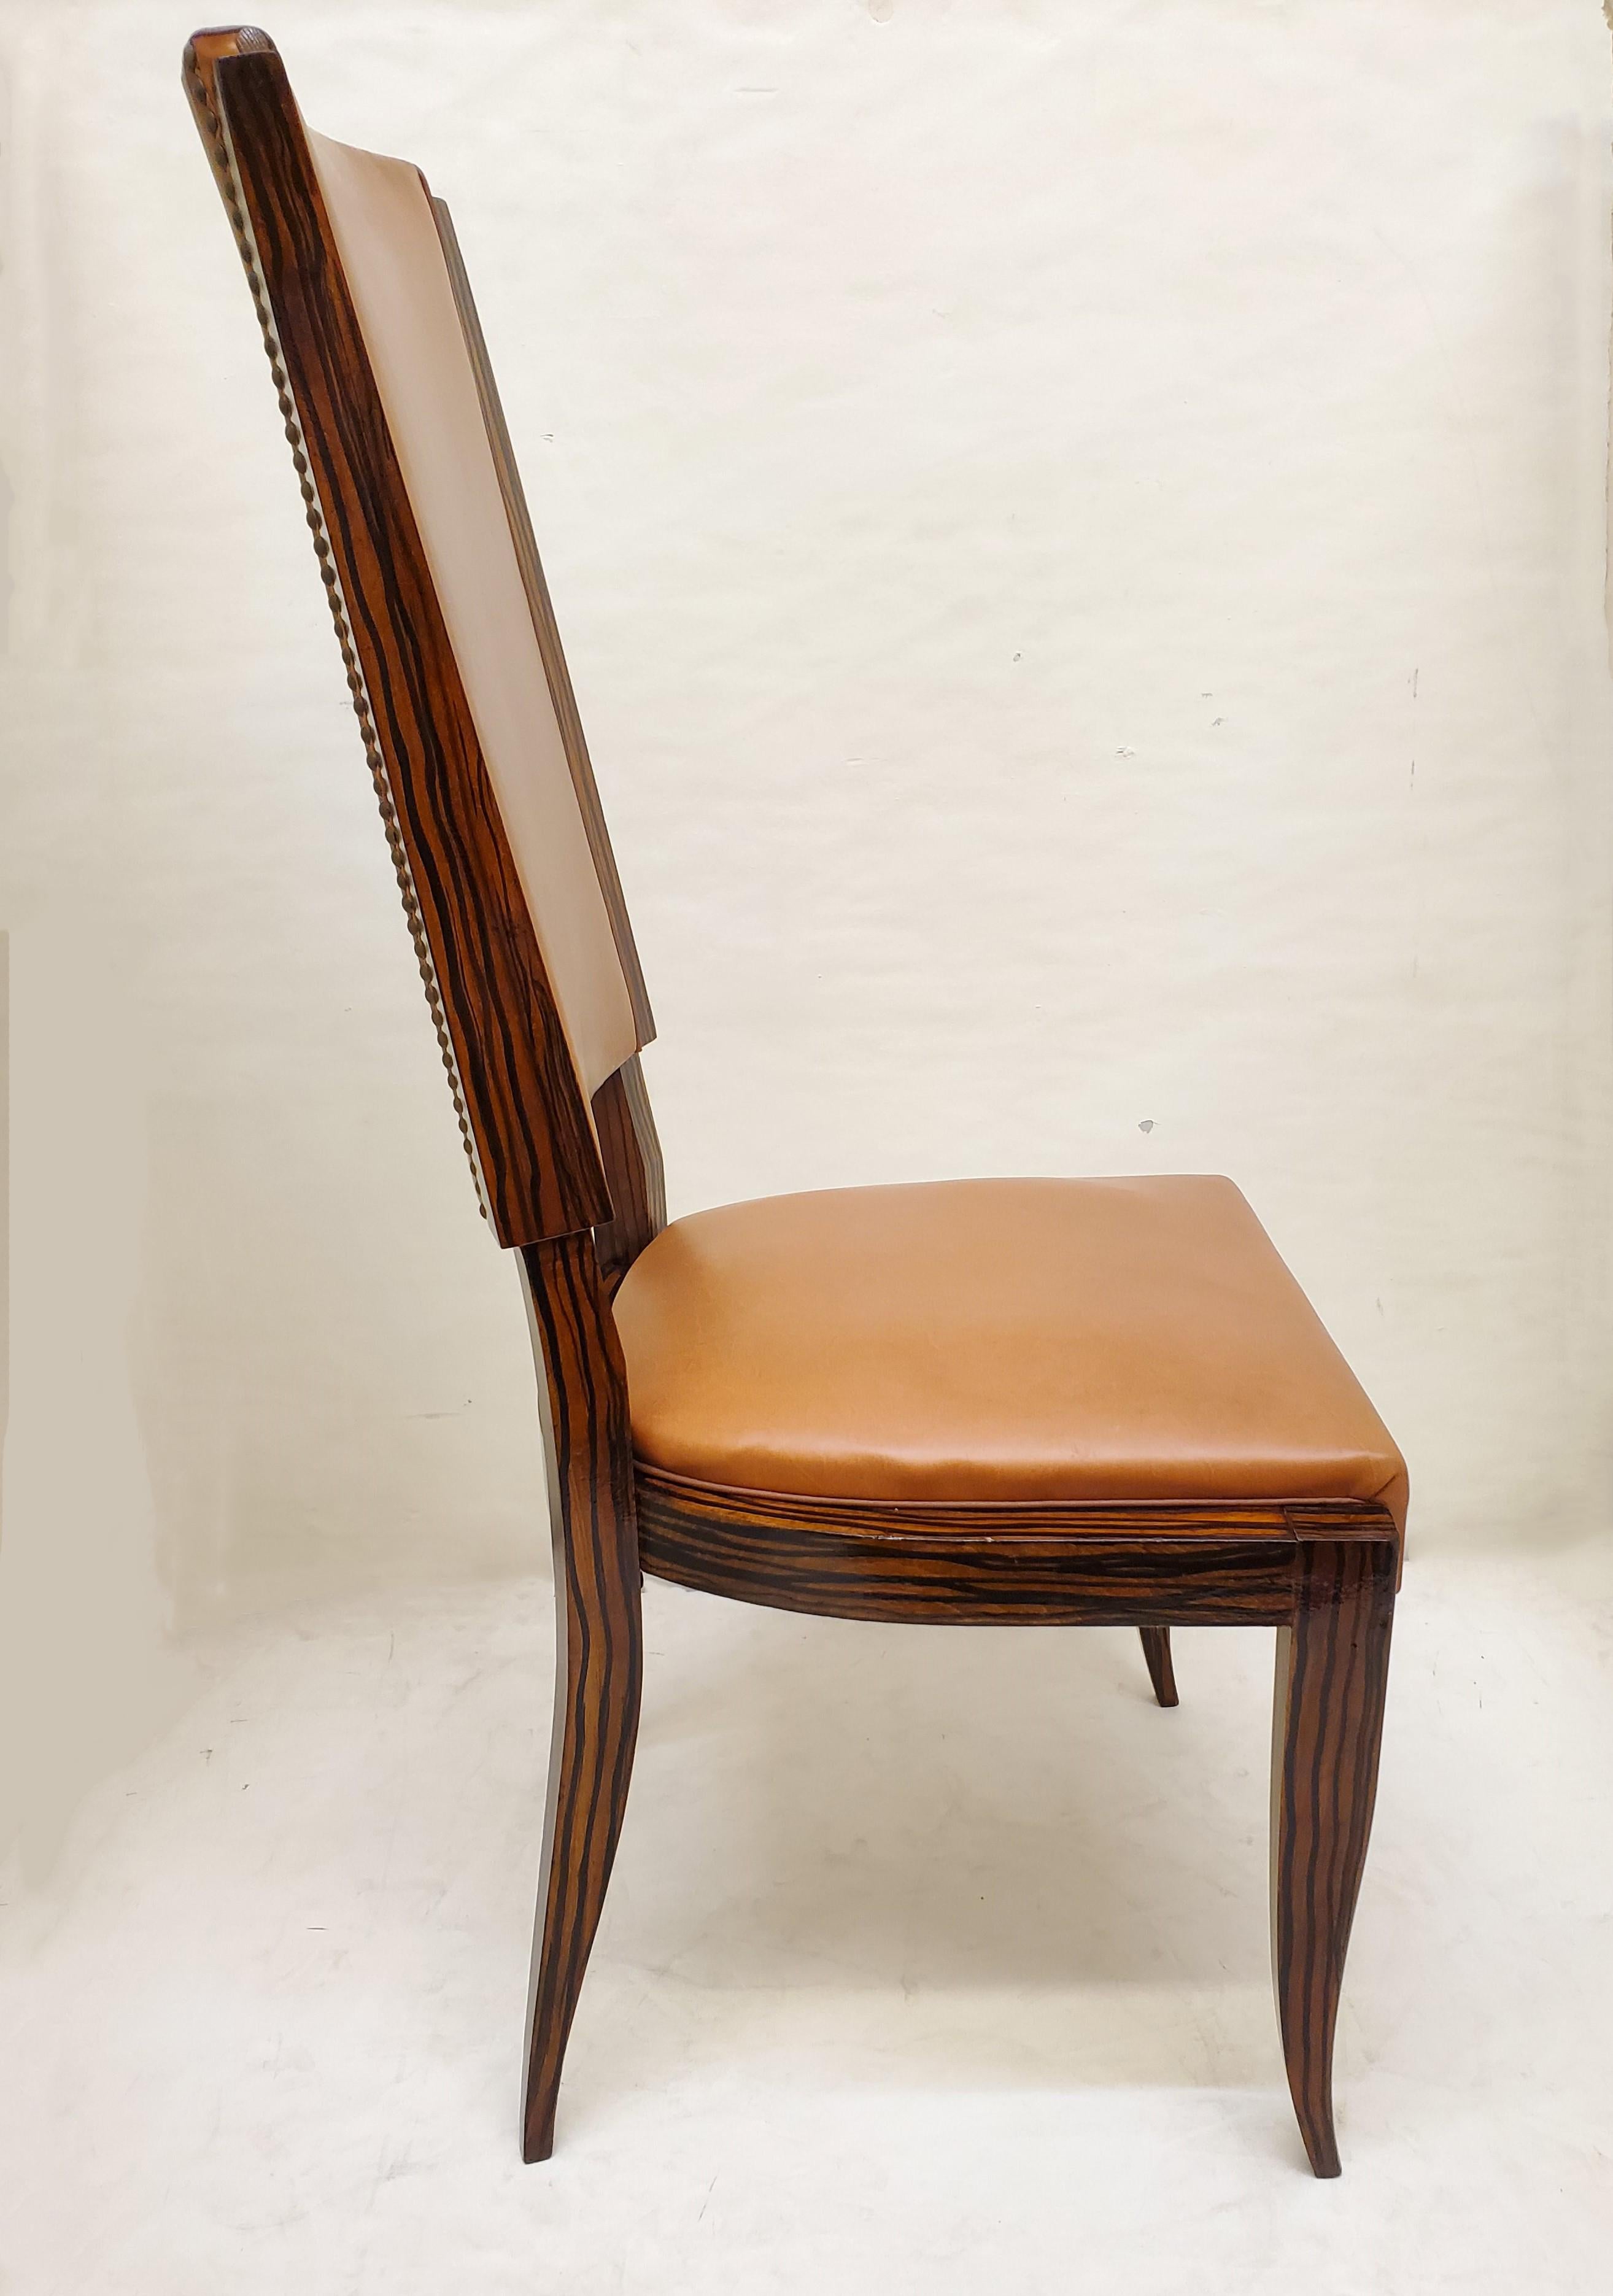 Hand-Painted Set of Six Original French Art Deco Faux Macassar Ebony Wood Dining Chairs For Sale